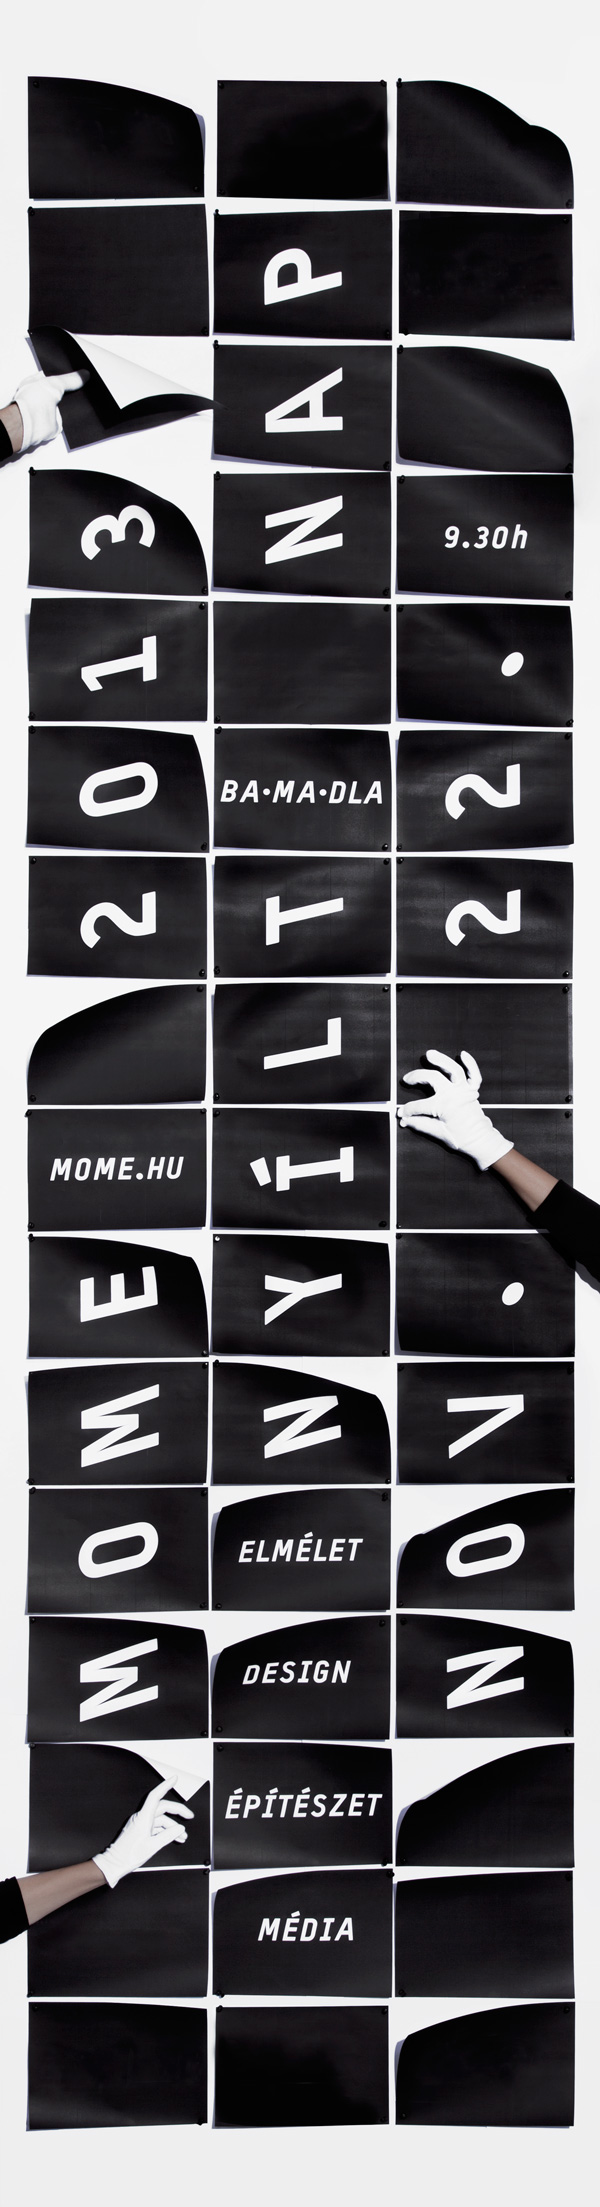 mome Moholy-Nagy Univerity Open Day nyílt nap identity wayfinding campaign brochure blackandwhite banner